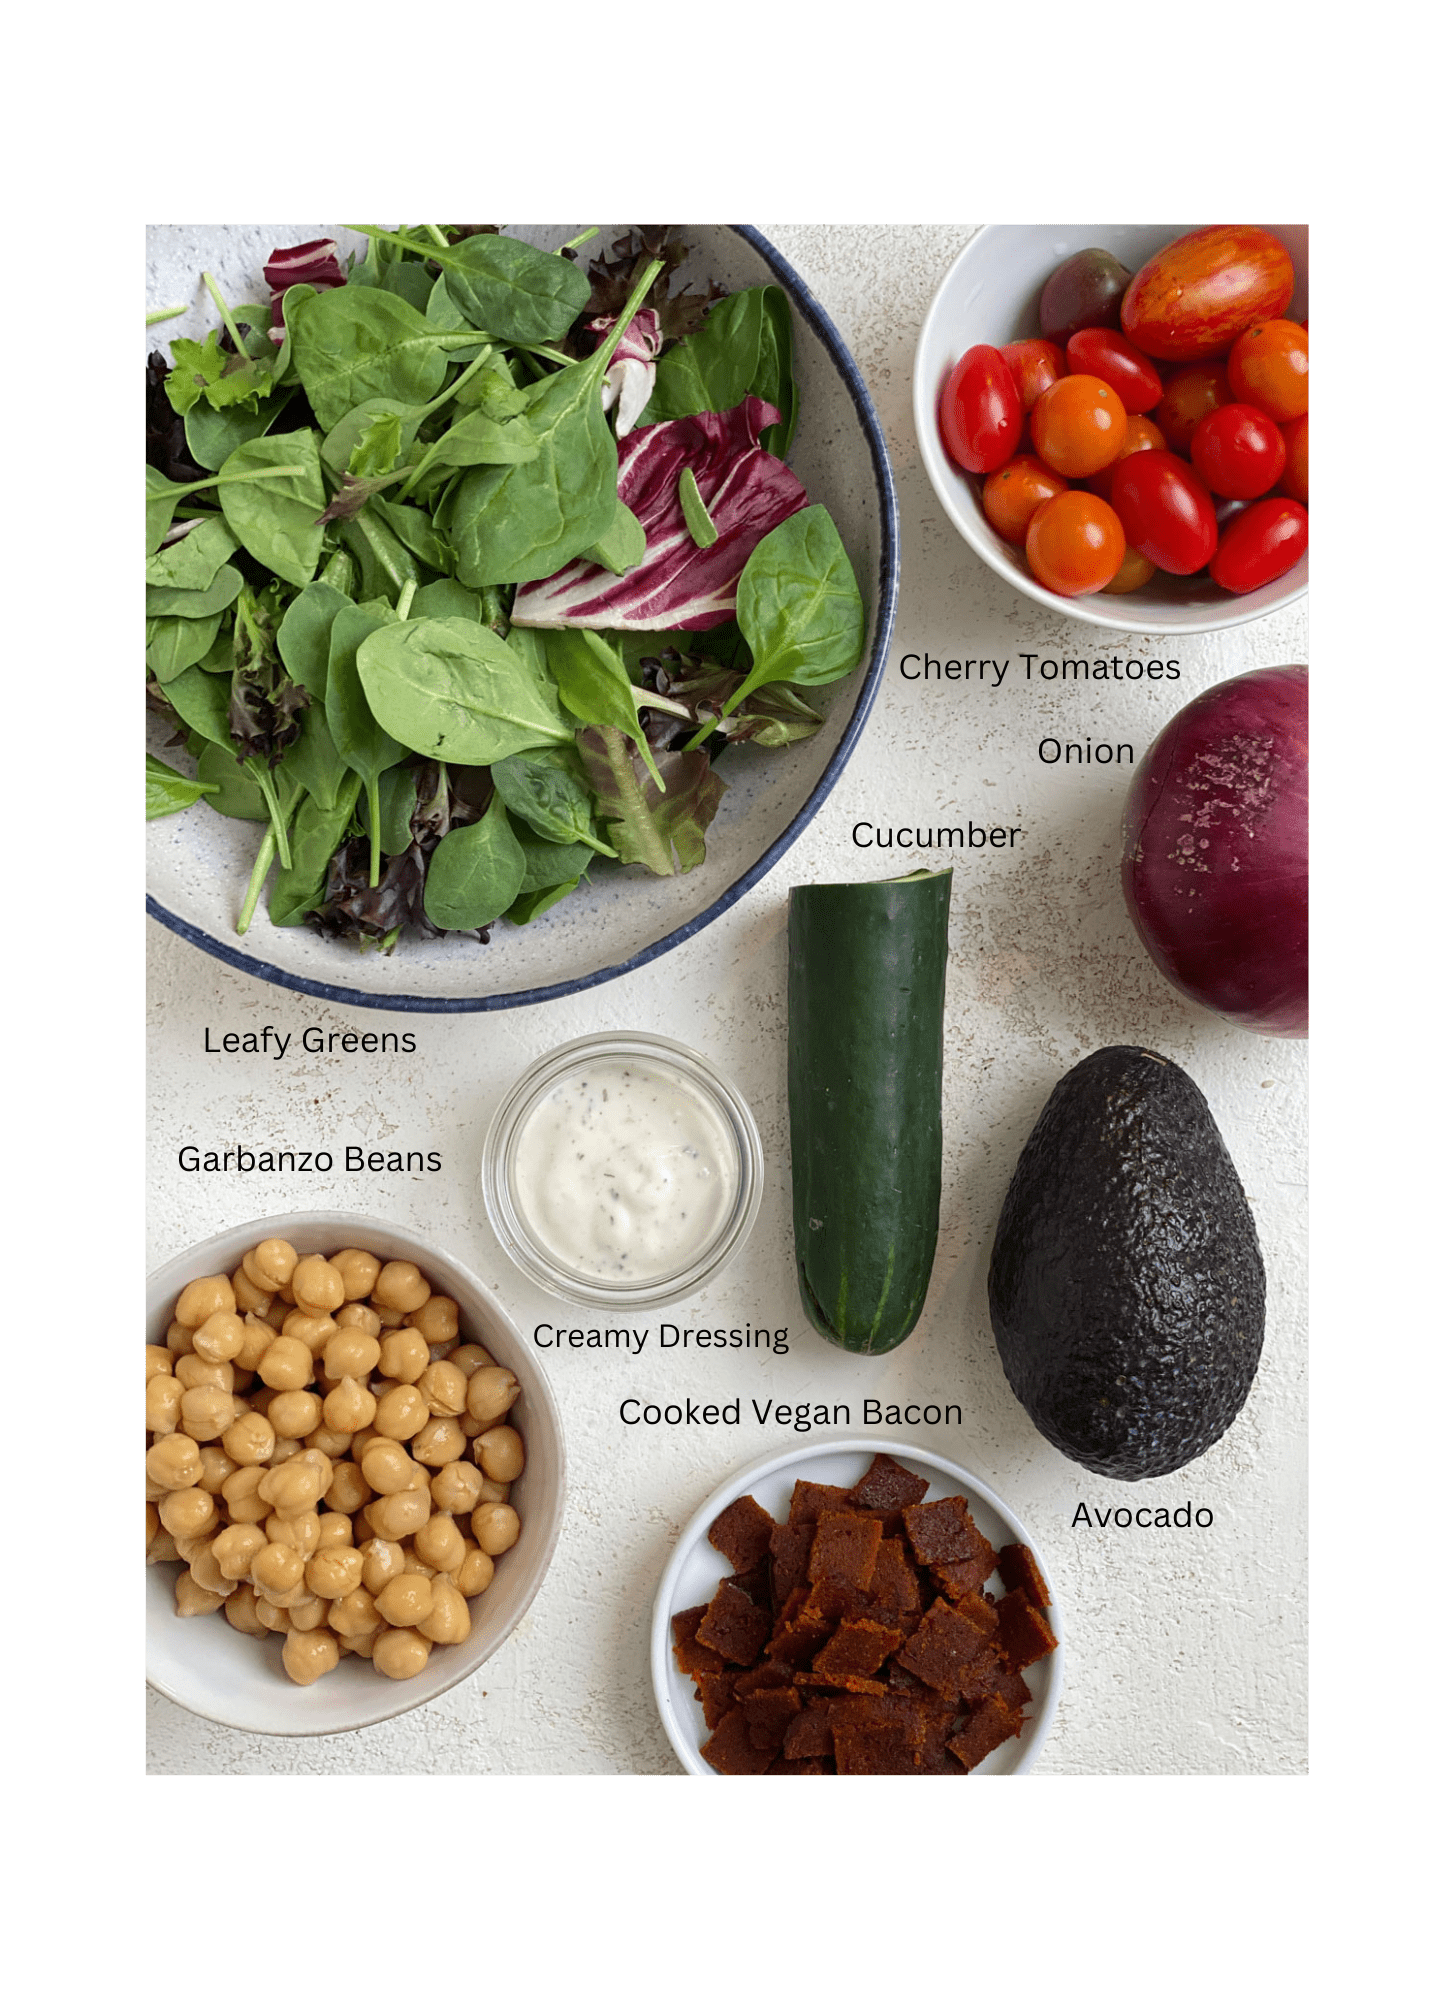 ingredients for Vegan Cobb Salad measured out against a white surface